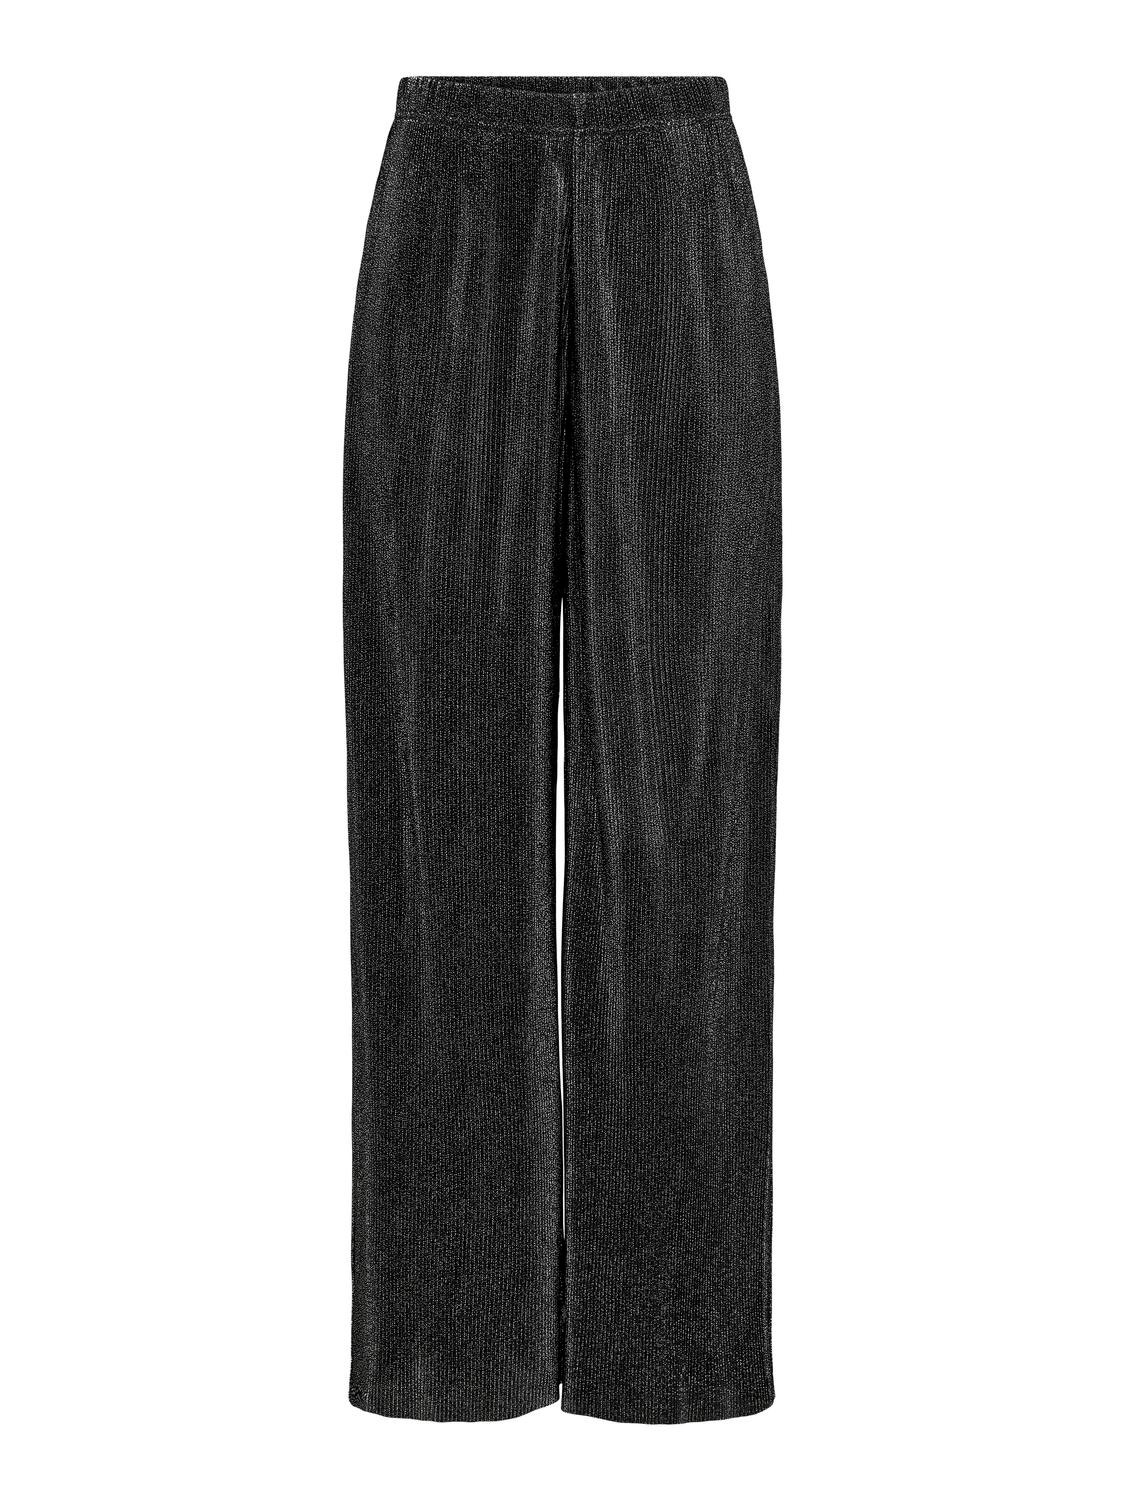 ONLY Regular Fit Trousers -Black - 15308283